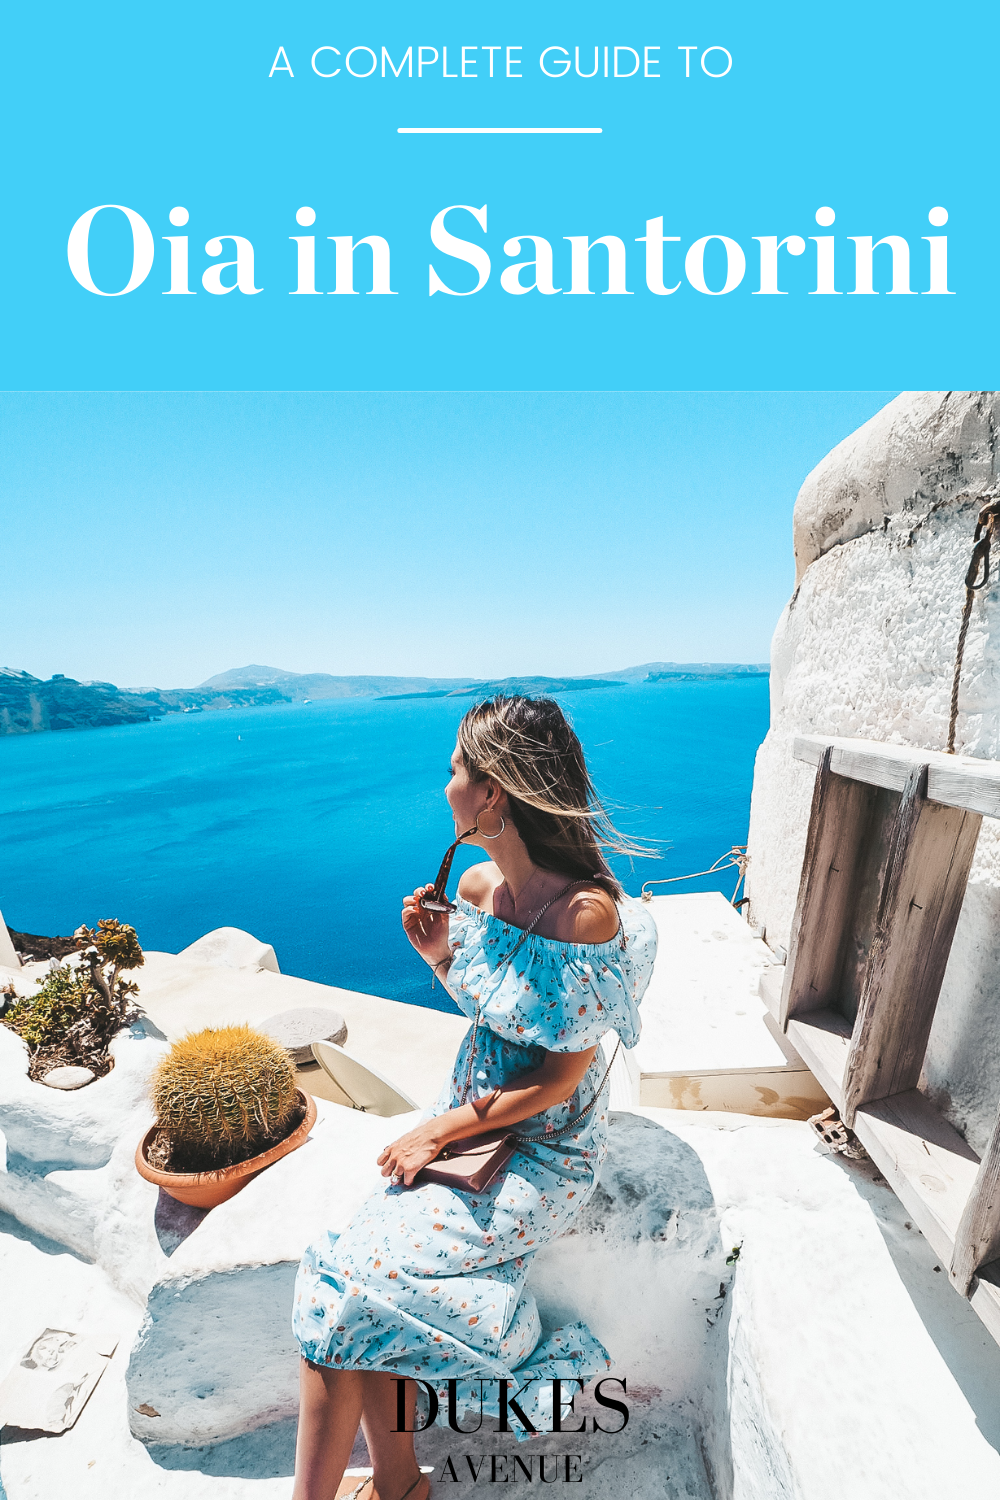 A woman admiring the sea with text overlay "A Complete Guide to Oia in Santorini"